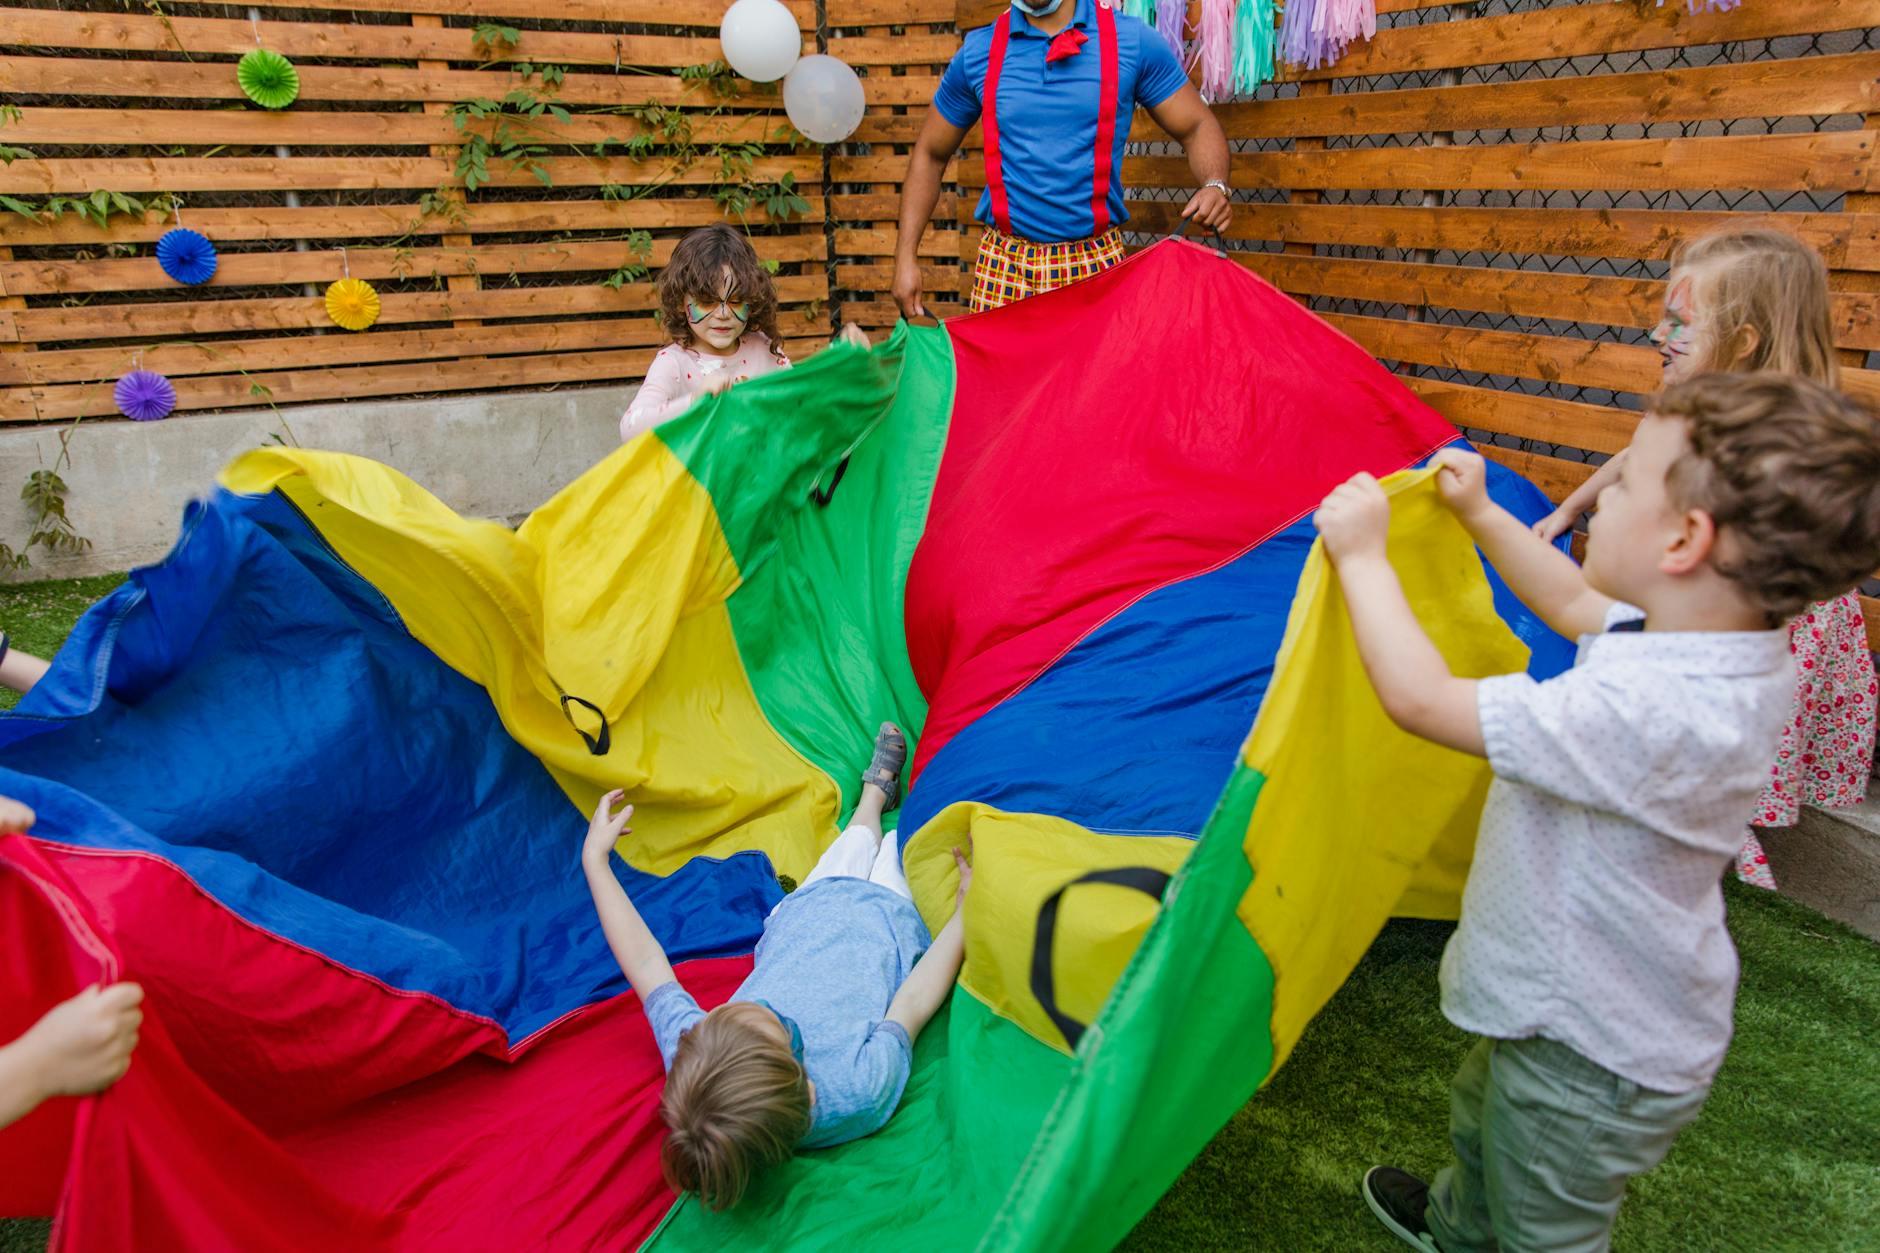 Children Playing with a Colorful Parachute